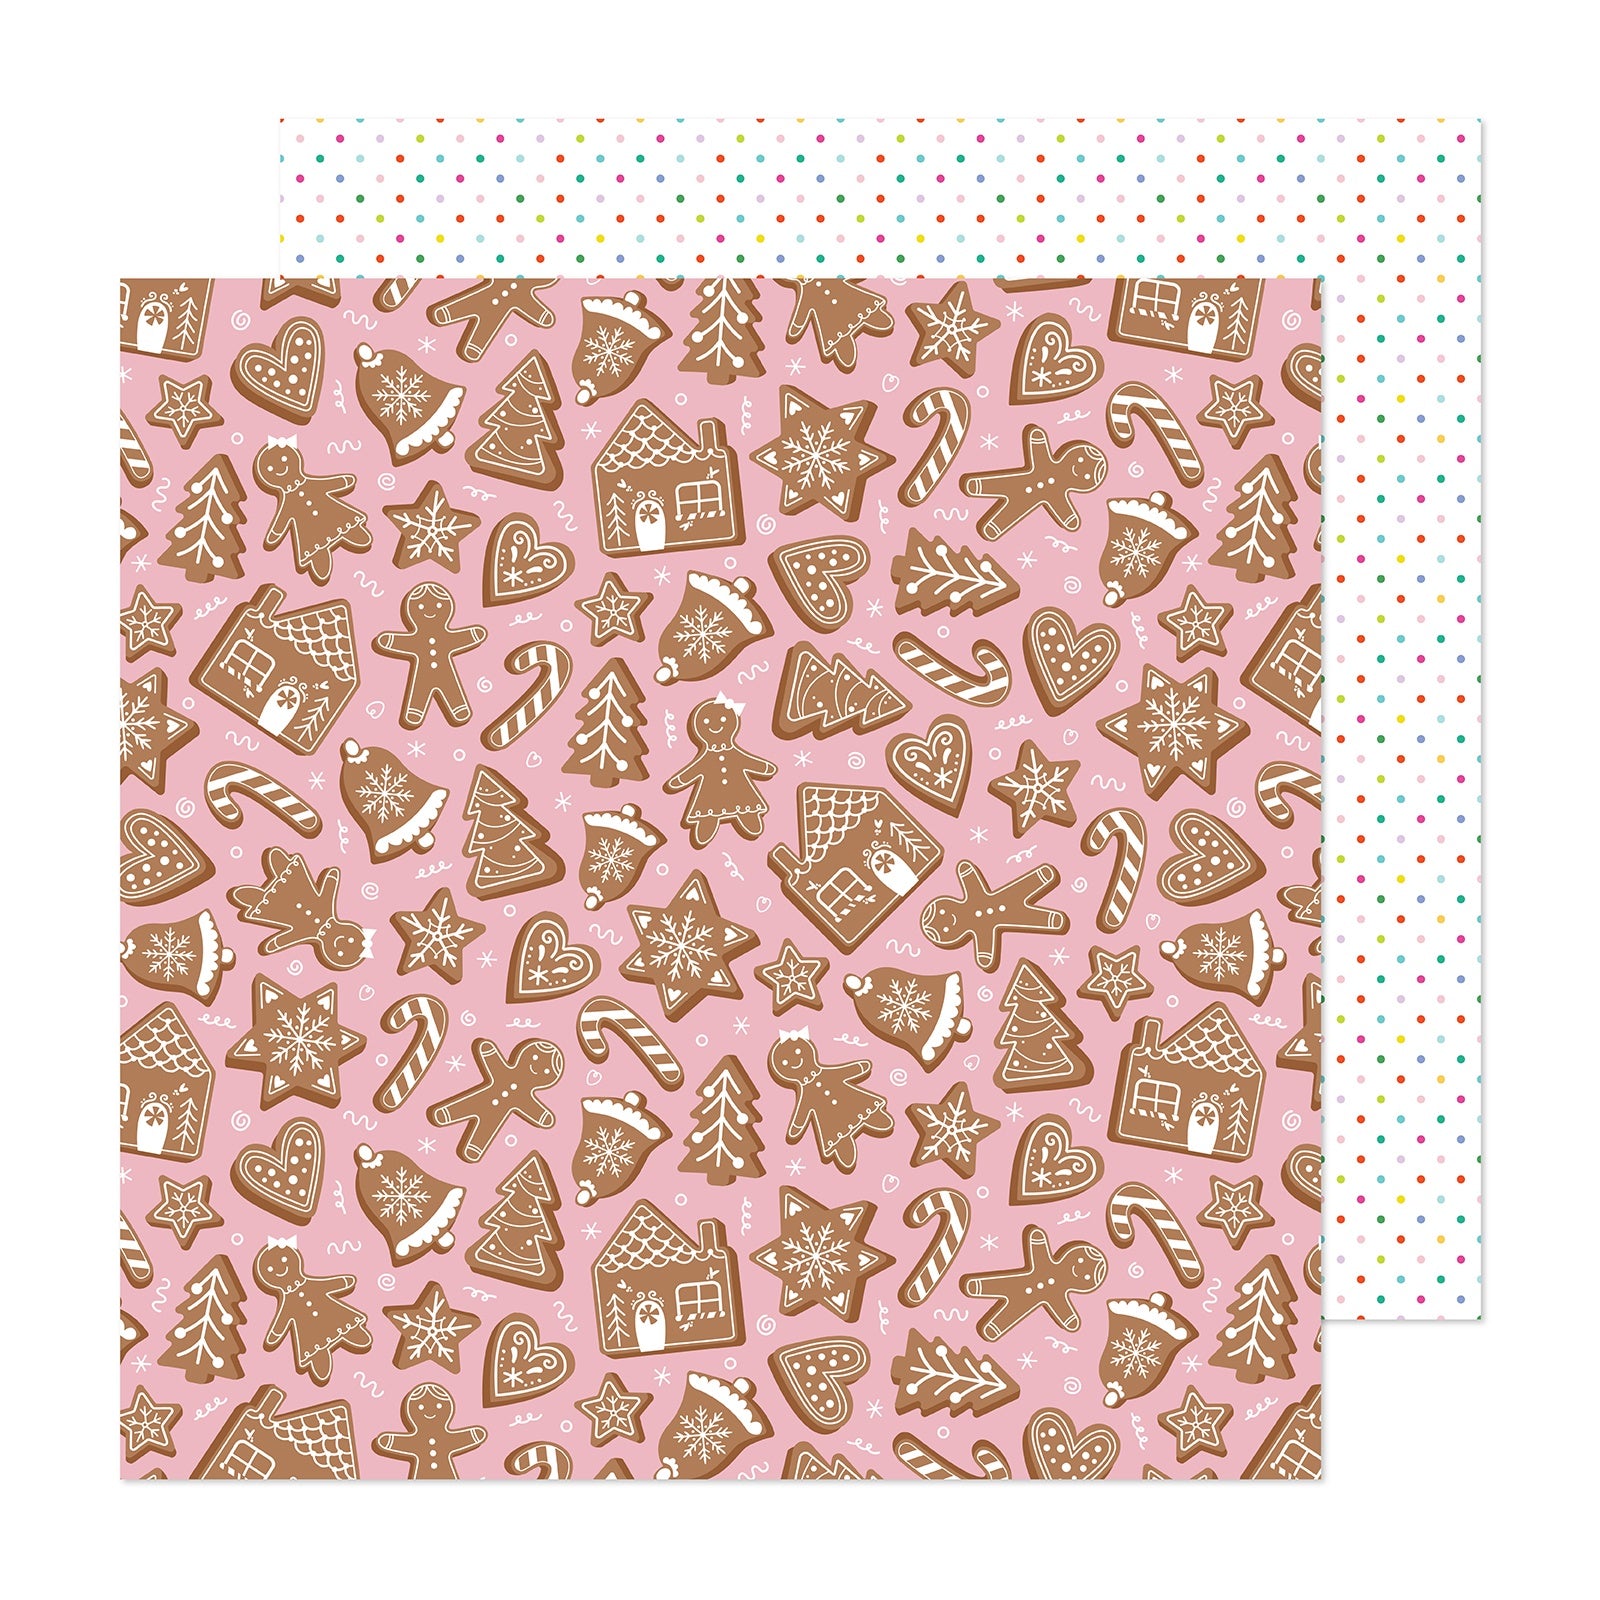 Paper Wishes – 12x12 Bulk Paper Collection